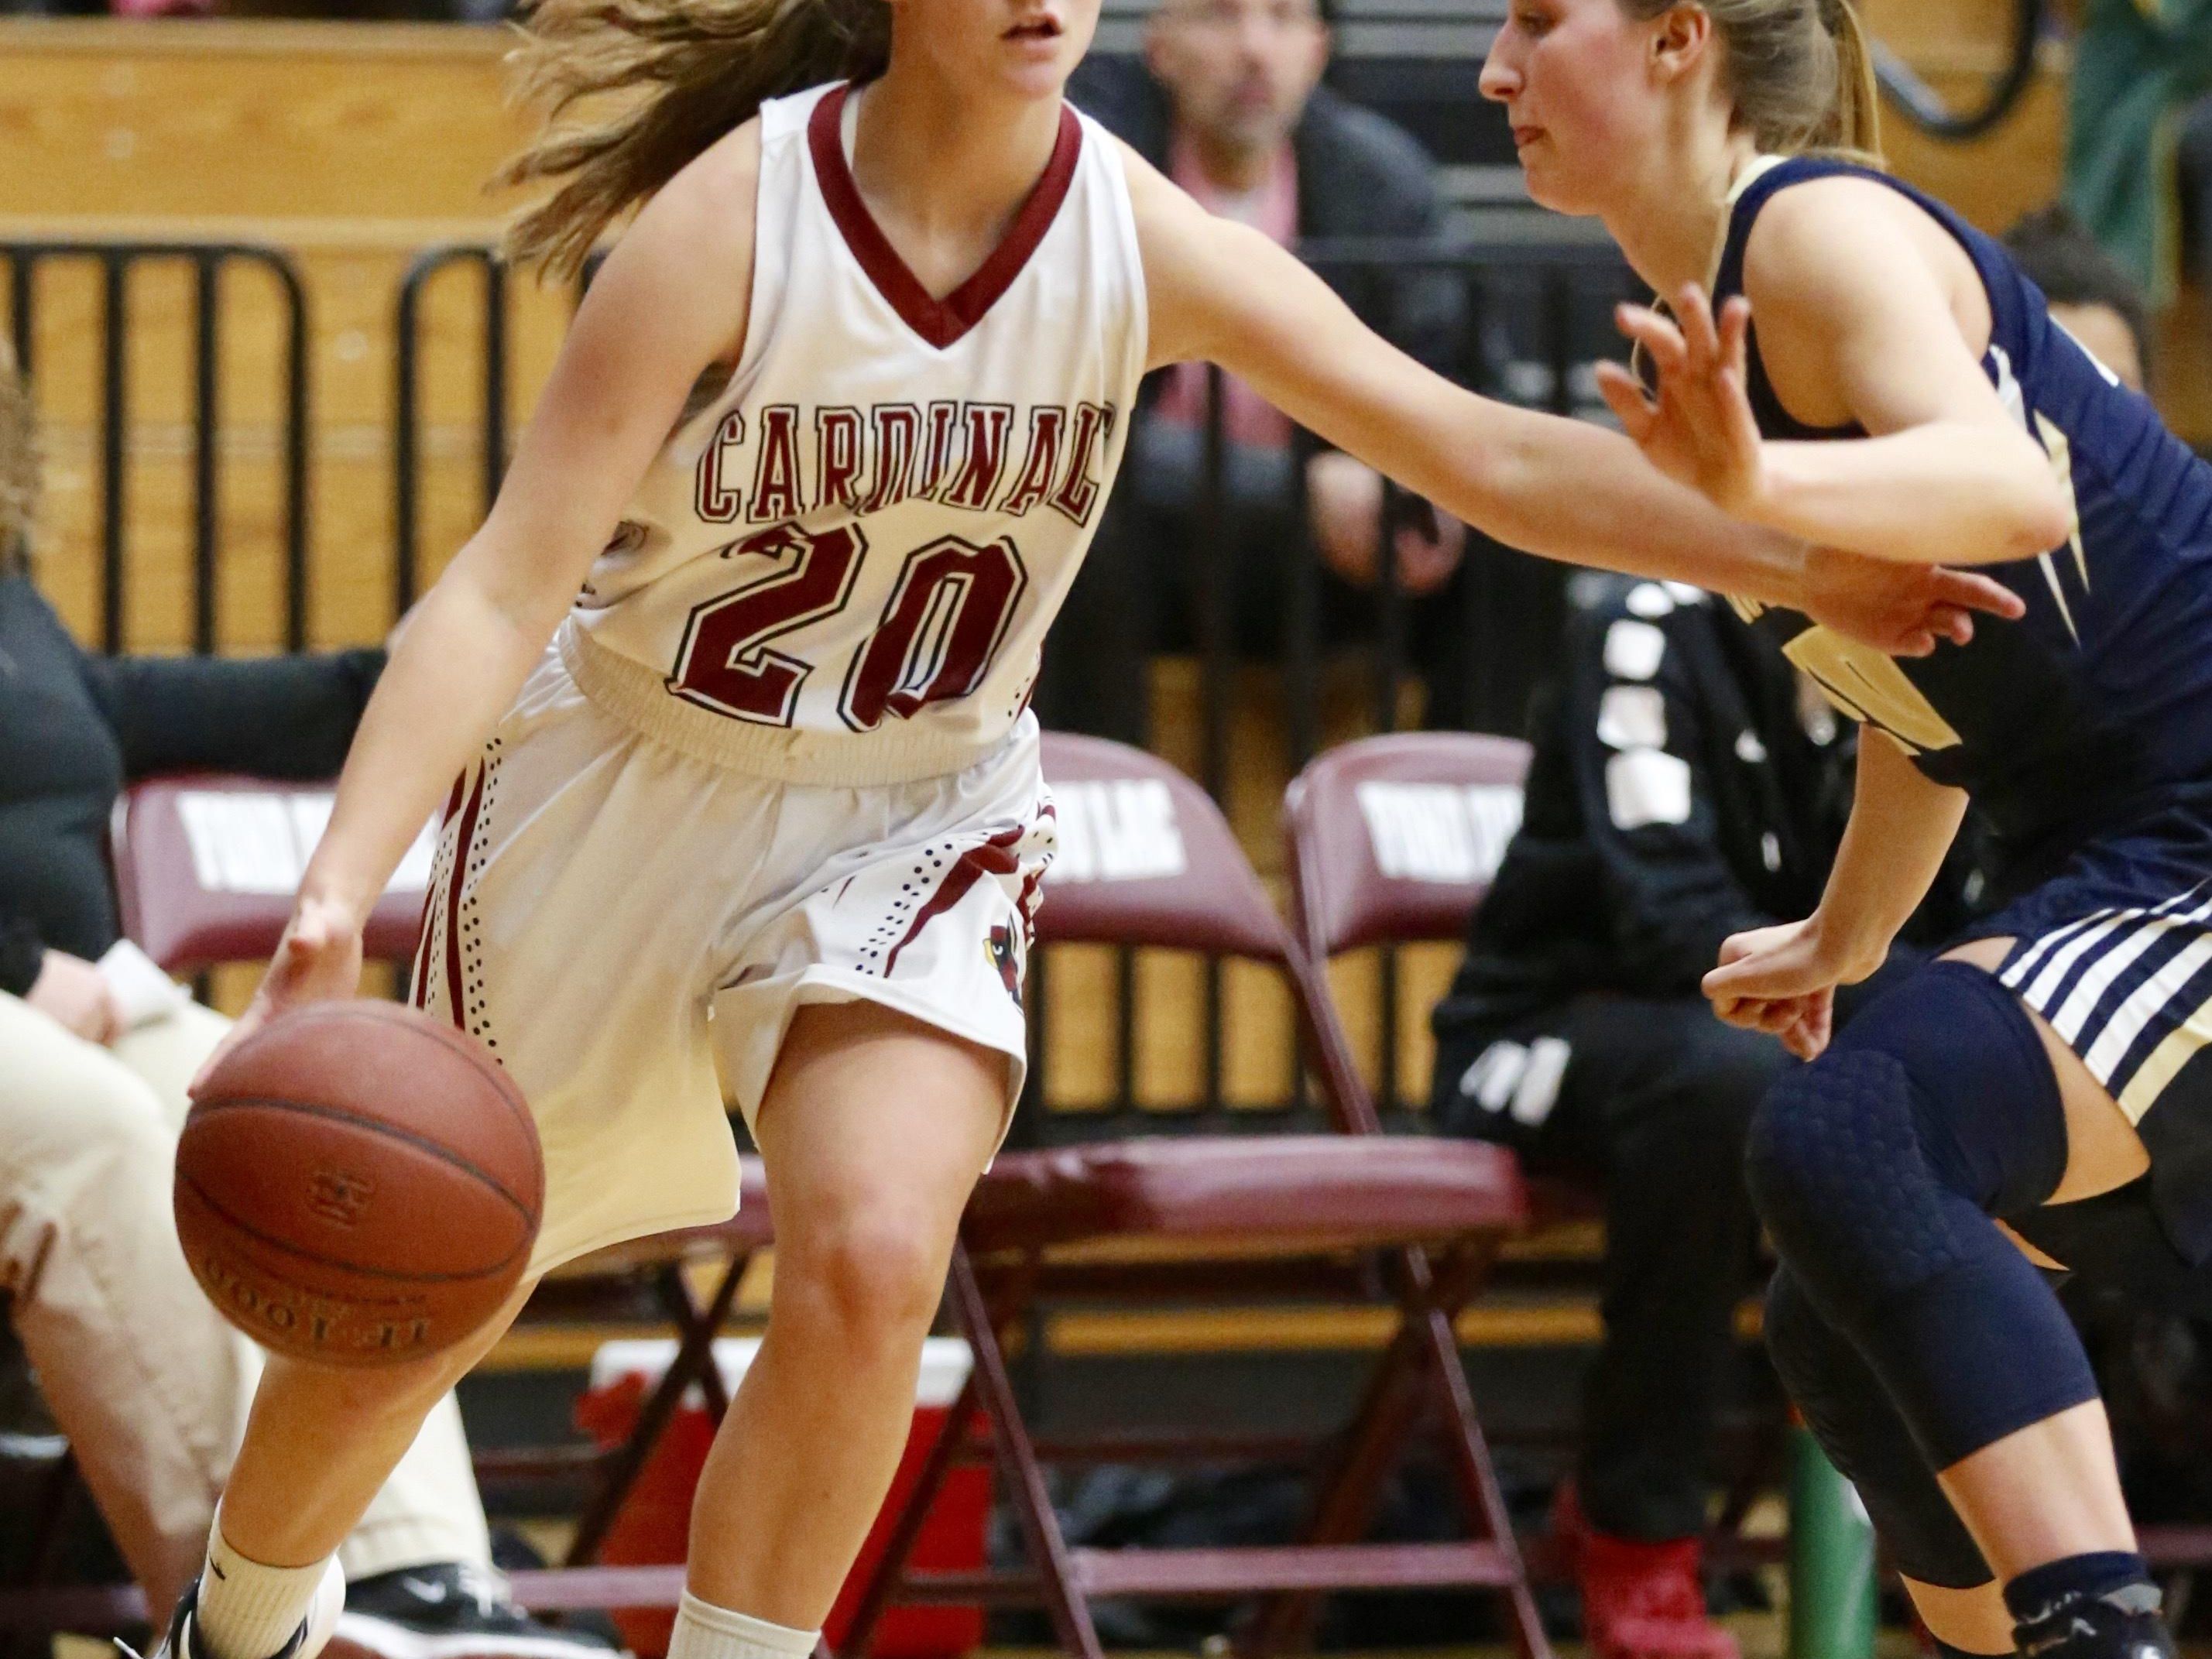 Fond du Lac's Carly Paulson dribbles with the ball during the Cardinals' game against Appleton North on Tuesday.